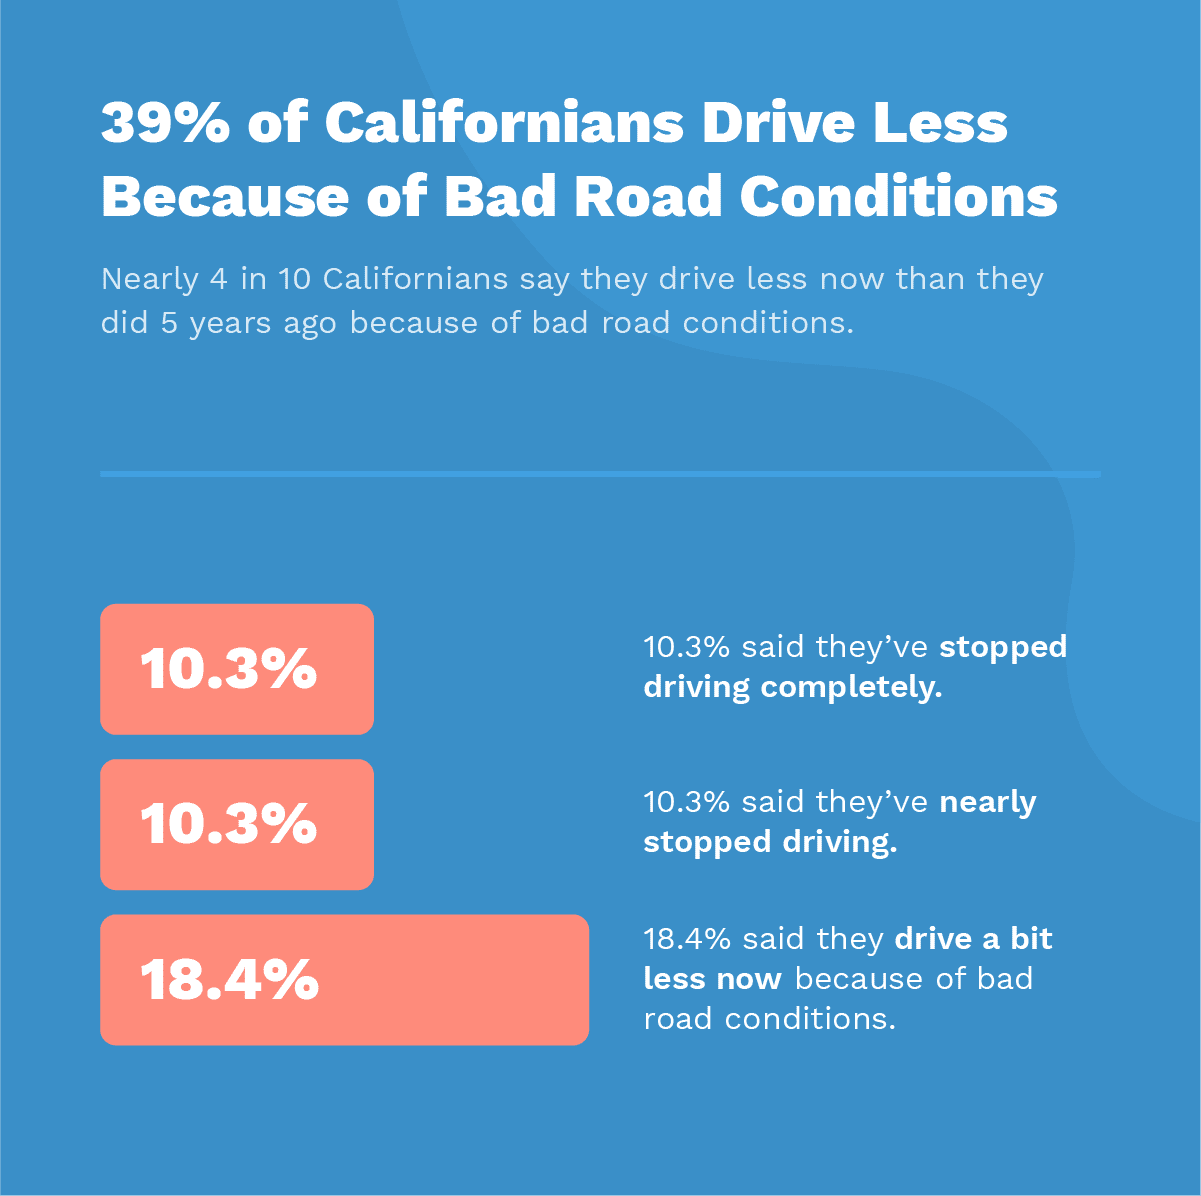 39% of Californians Drive Less Because of Bad Road Conditions